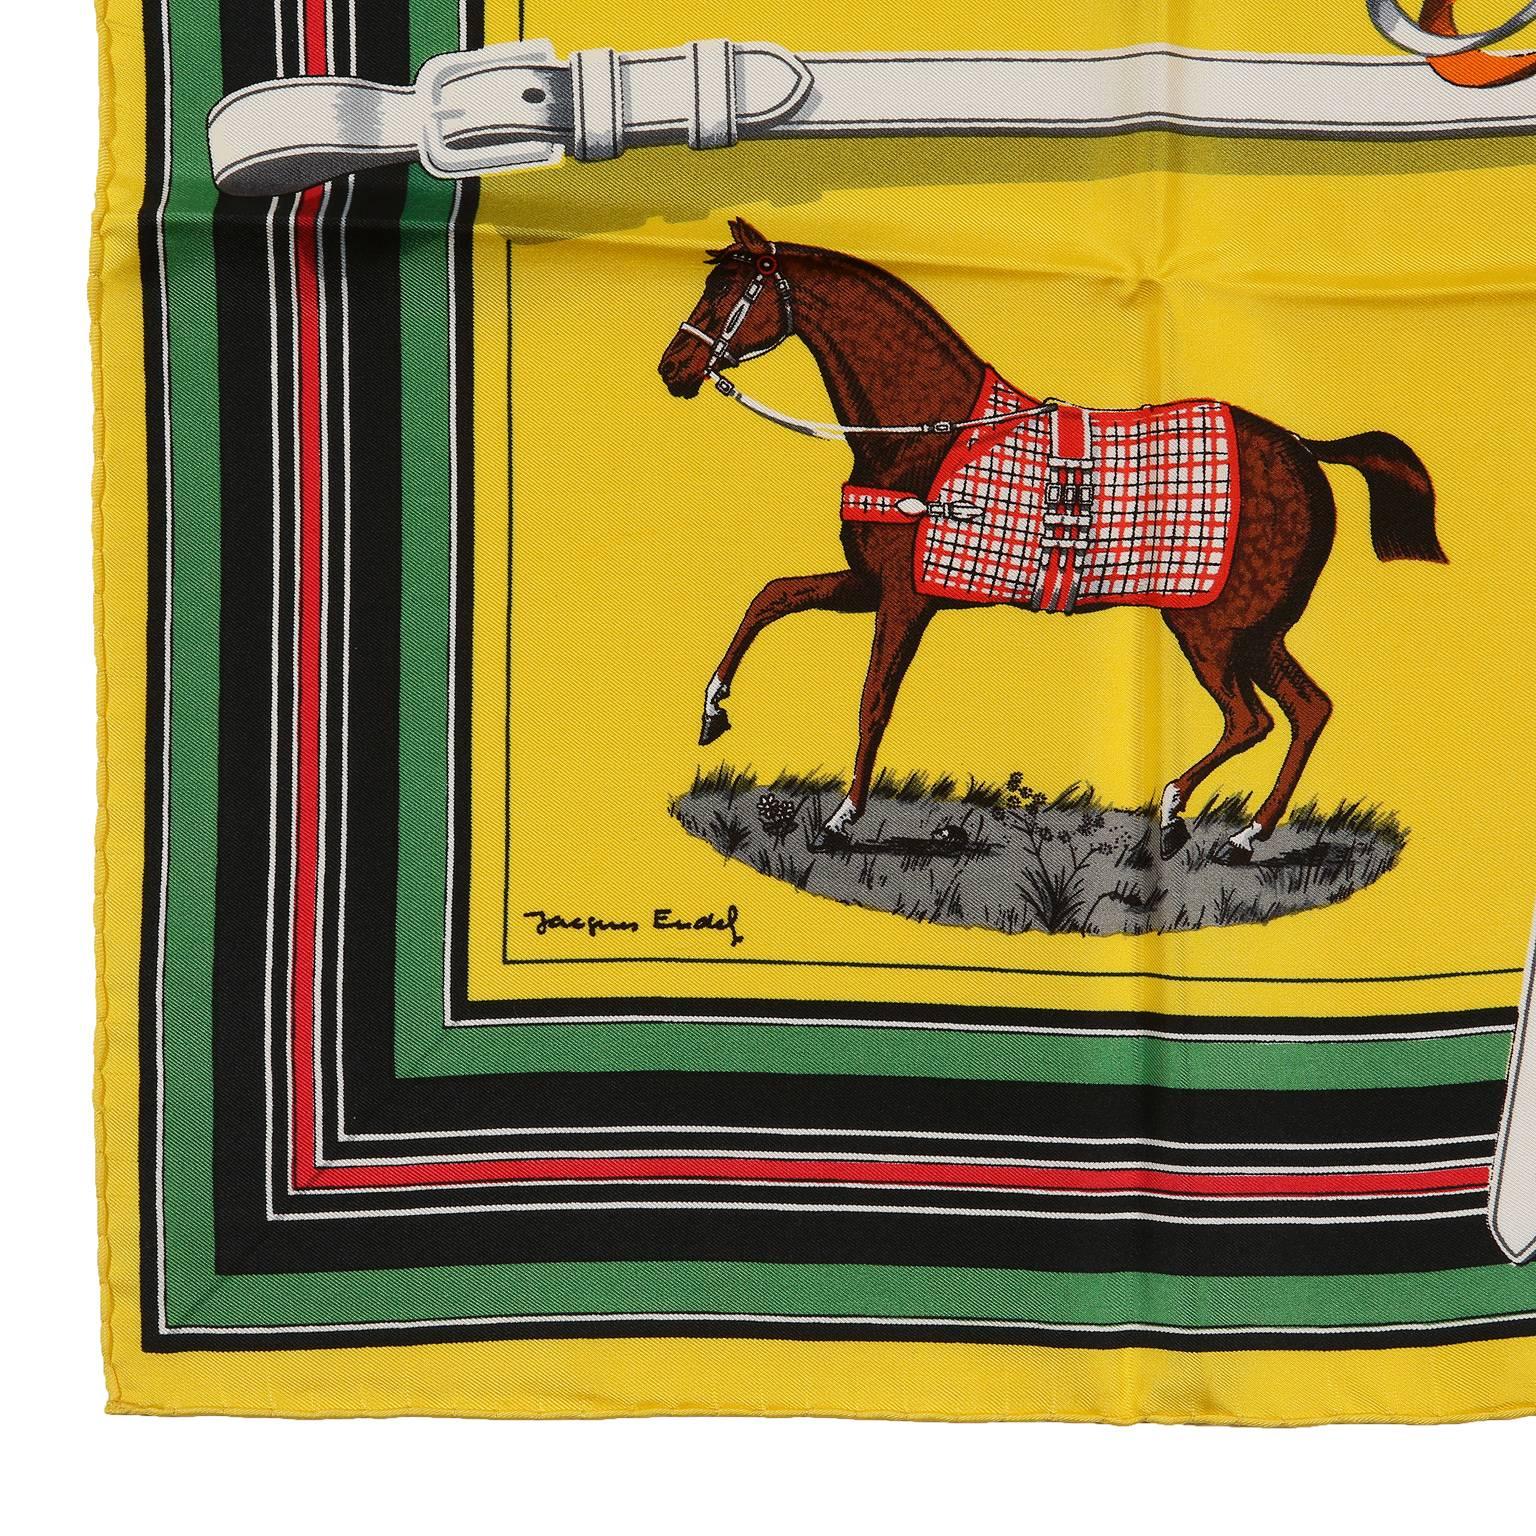  Hermès Yellow Silk Couvertures et Tenues de Jour 90 cm Scarf- PRISTINE; Never Worn
 Designed by Jacques Eudel, the equestrian theme depicts horses in their finest blankets and gear. White belts divide the print into a grid design.   100% silk.  